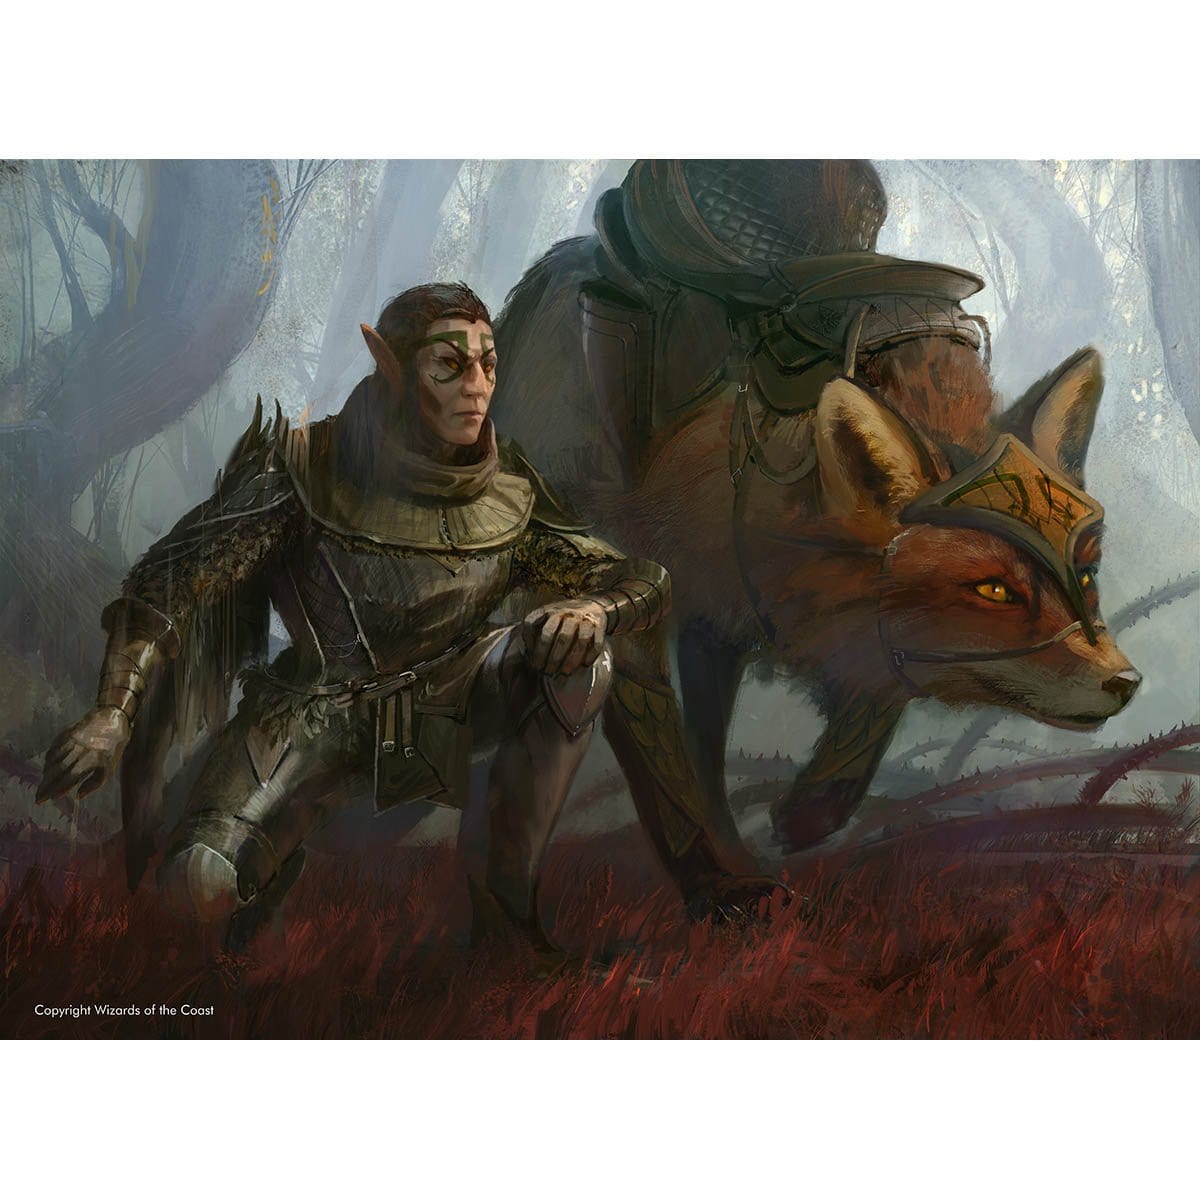 Wildwood Tracker Print - Print - Original Magic Art - Accessories for Magic the Gathering and other card games